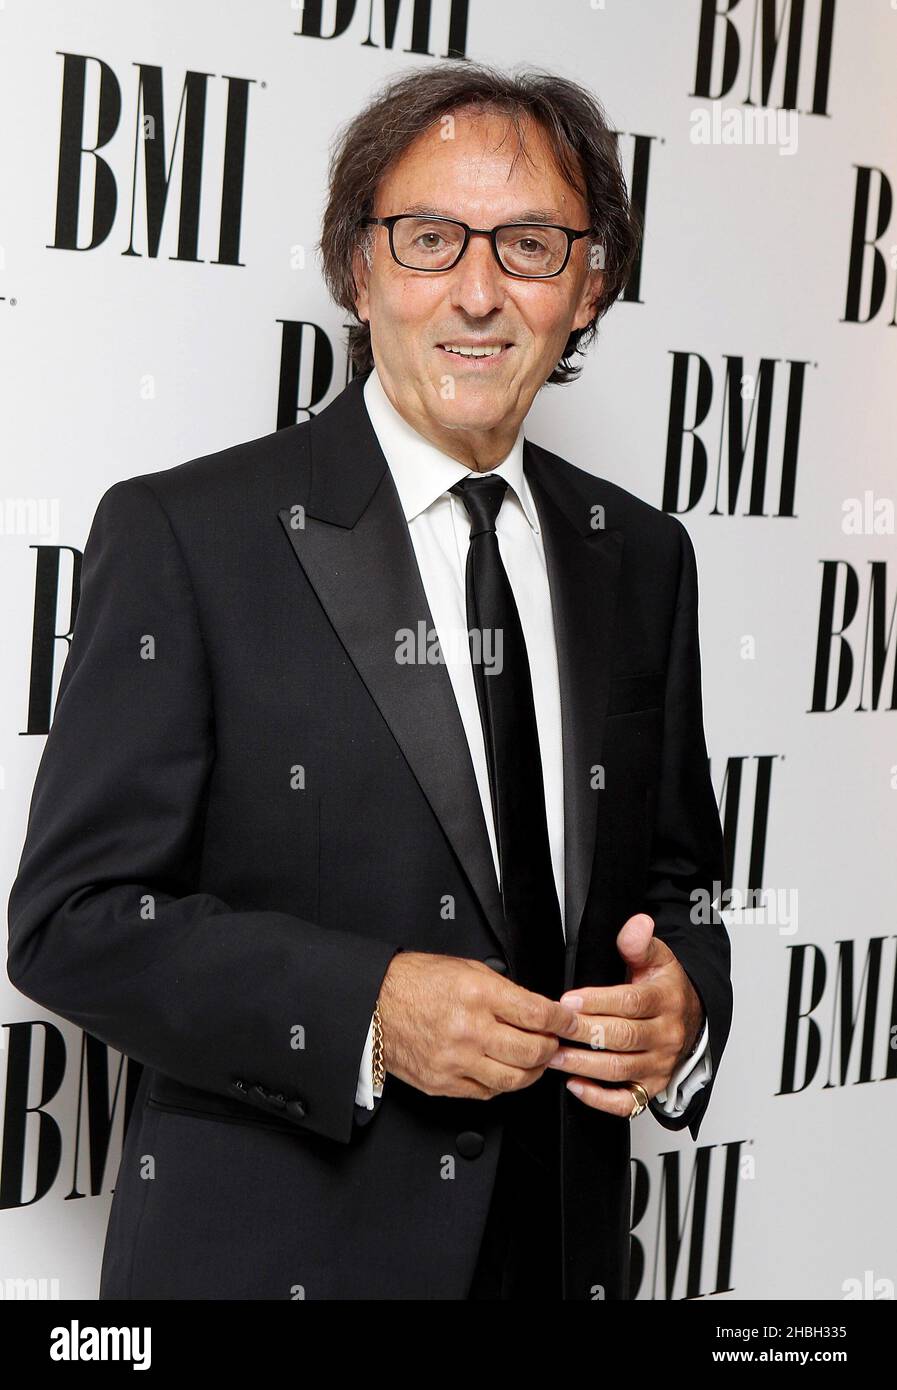 Don Black arriving at the BMI 2012 Awards at the Dorchester Hotel in London. Stock Photo